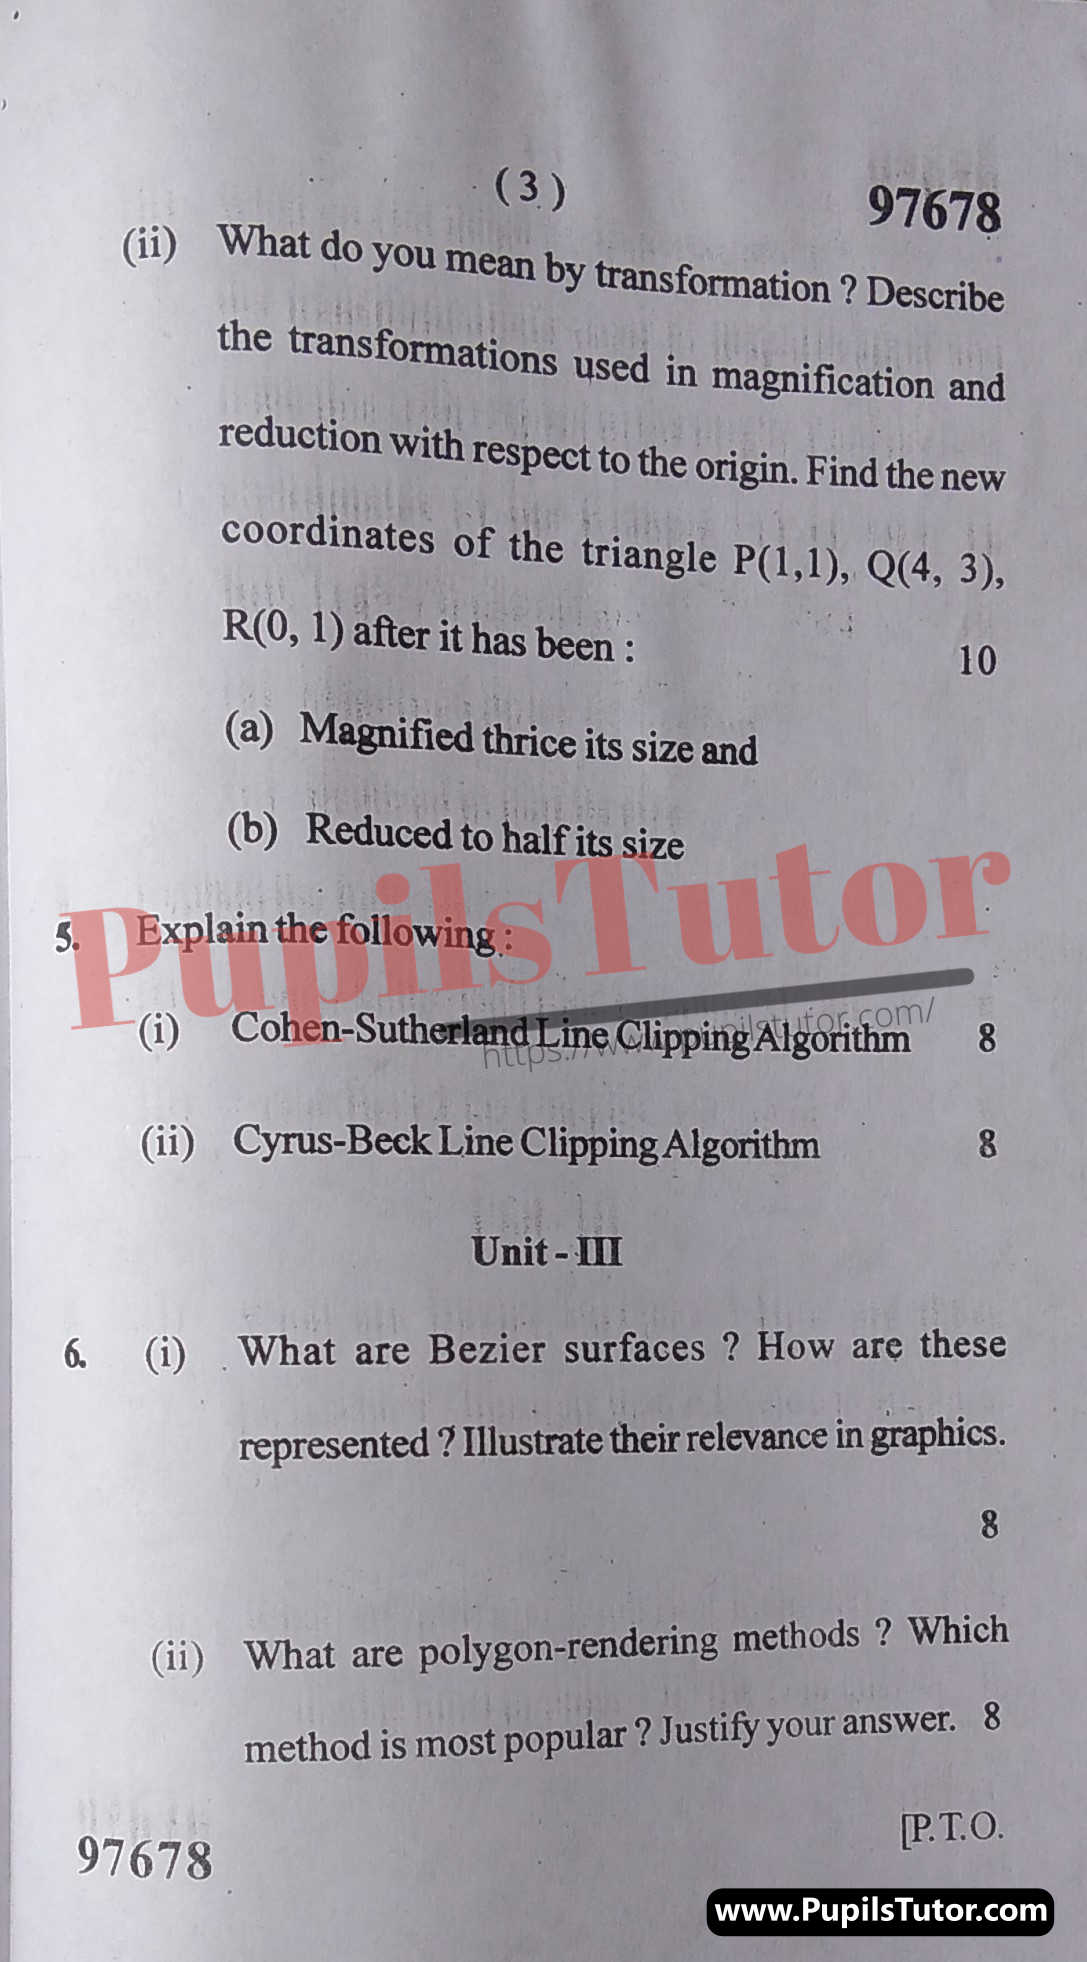 Free Download PDF Of M.D. University B.C.A 5th Semester Latest Question Paper For Computer Graphics Subject (Page 3) - https://www.pupilstutor.com